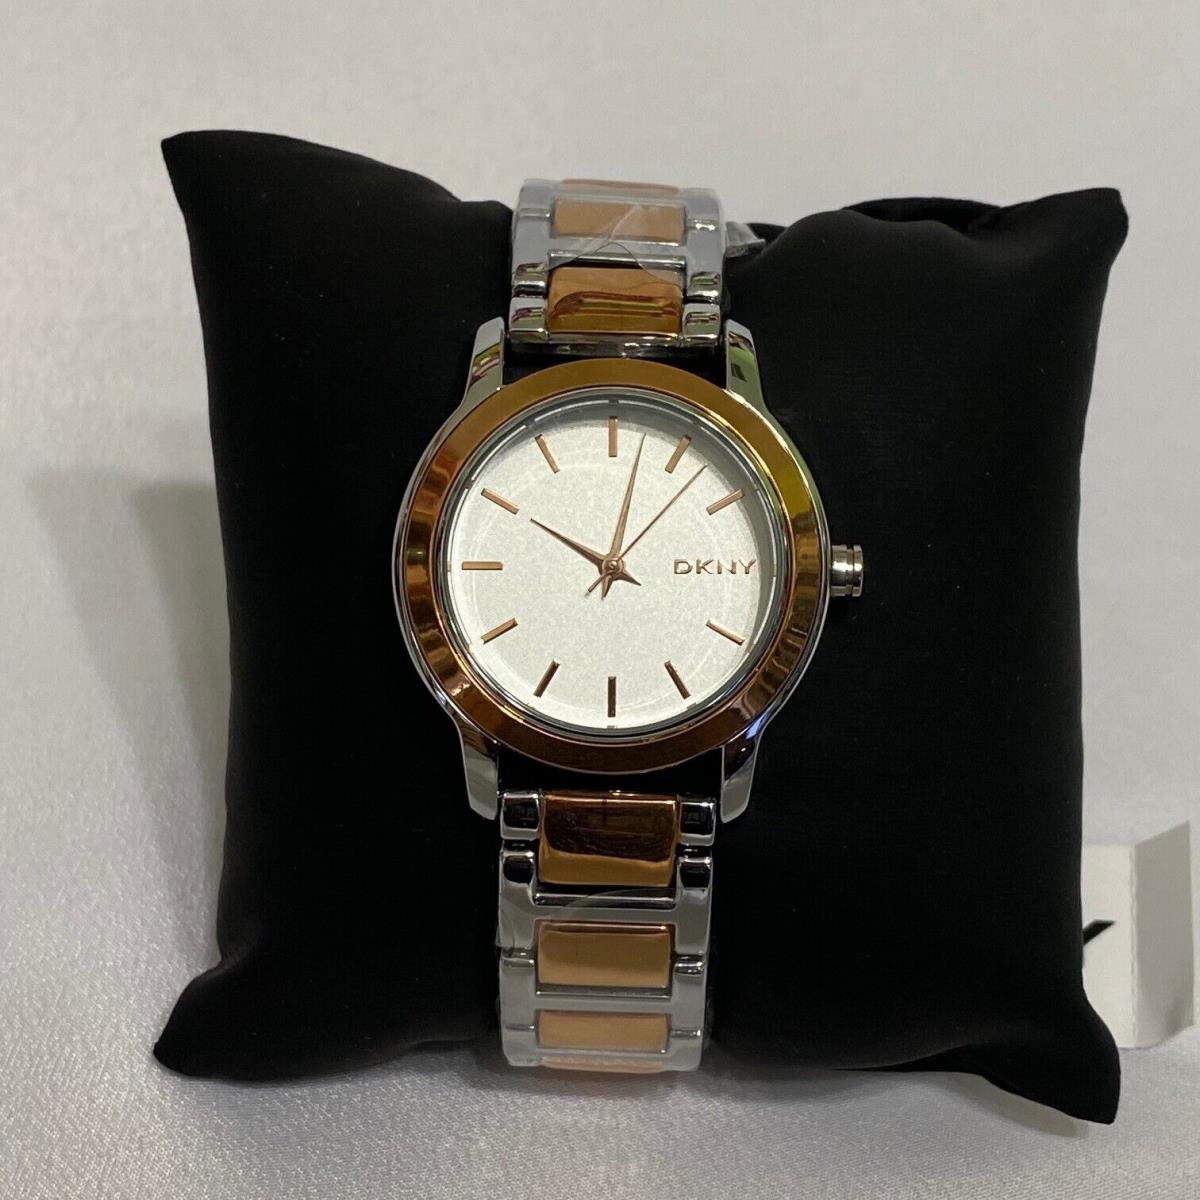 DKNY watch Stanhoped - Silver Face, White Dial